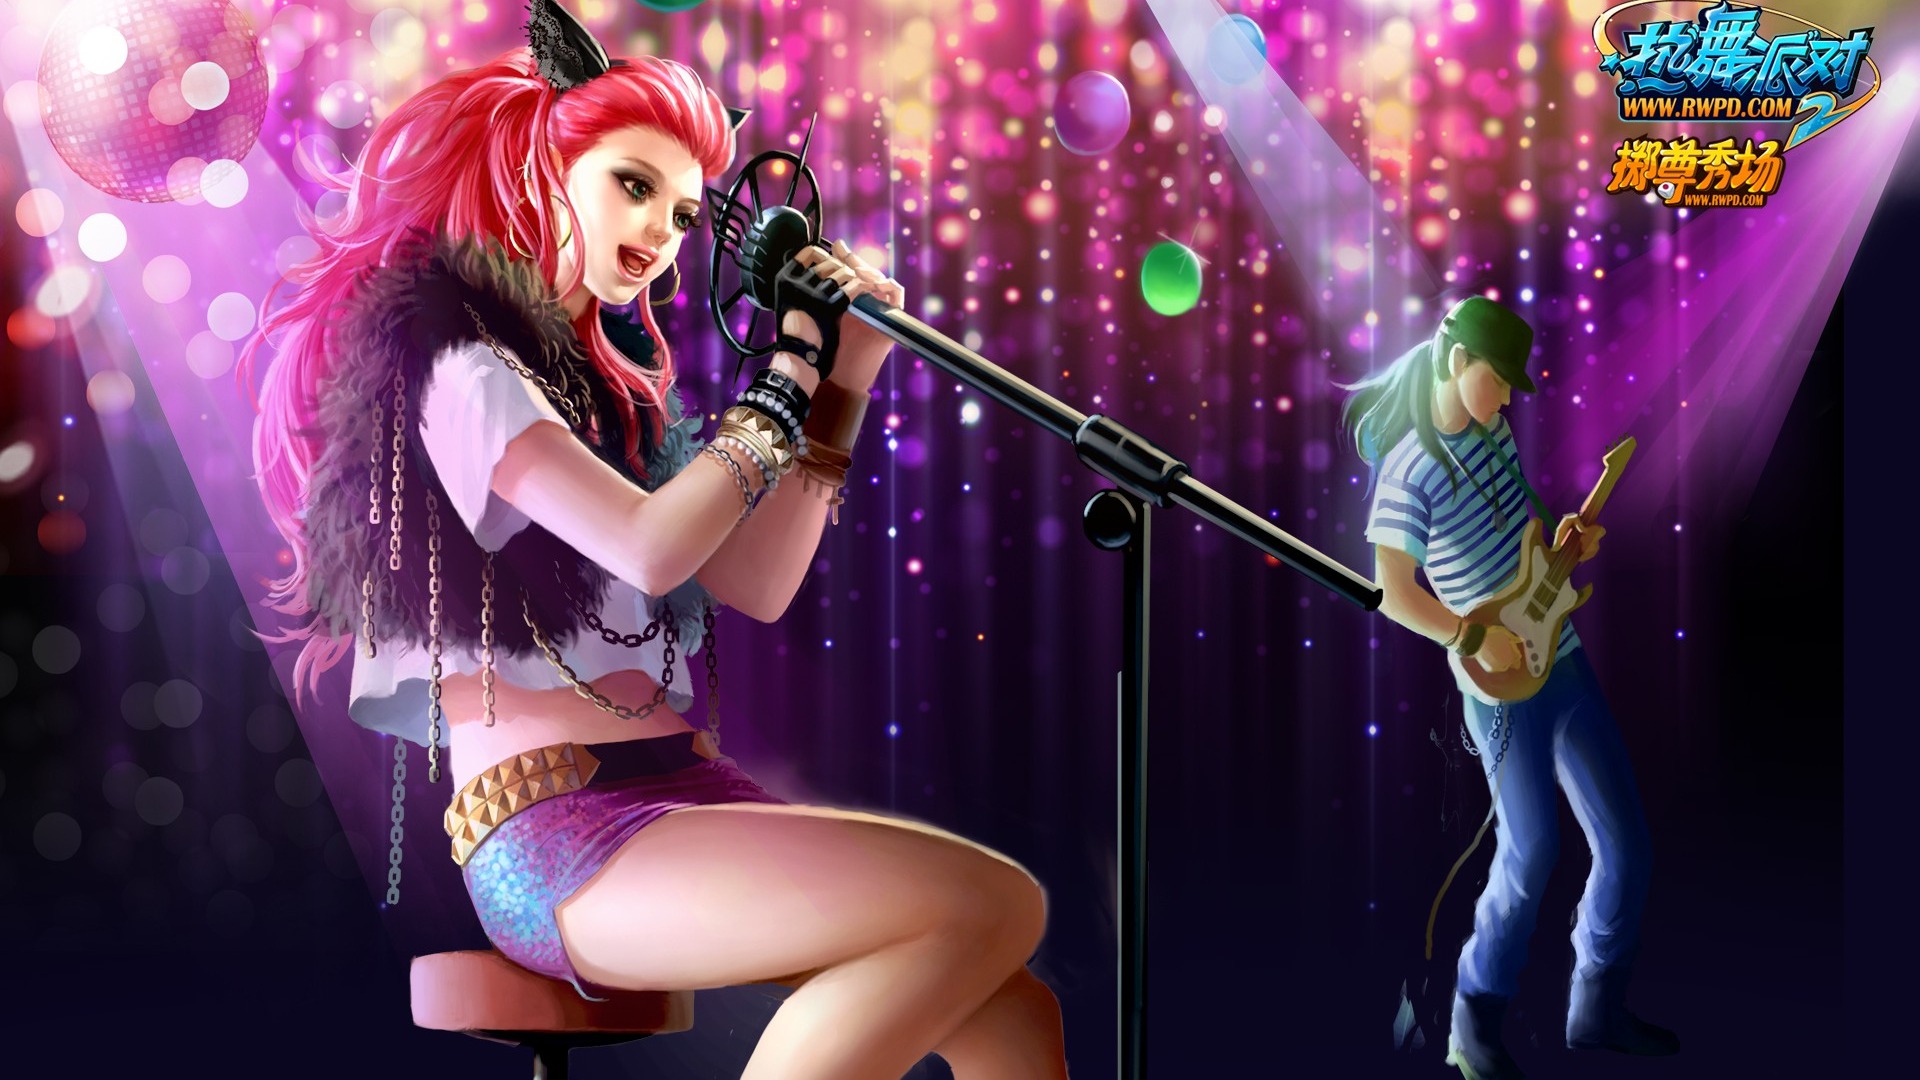 Online game Hot Dance Party II official wallpapers #38 - 1920x1080